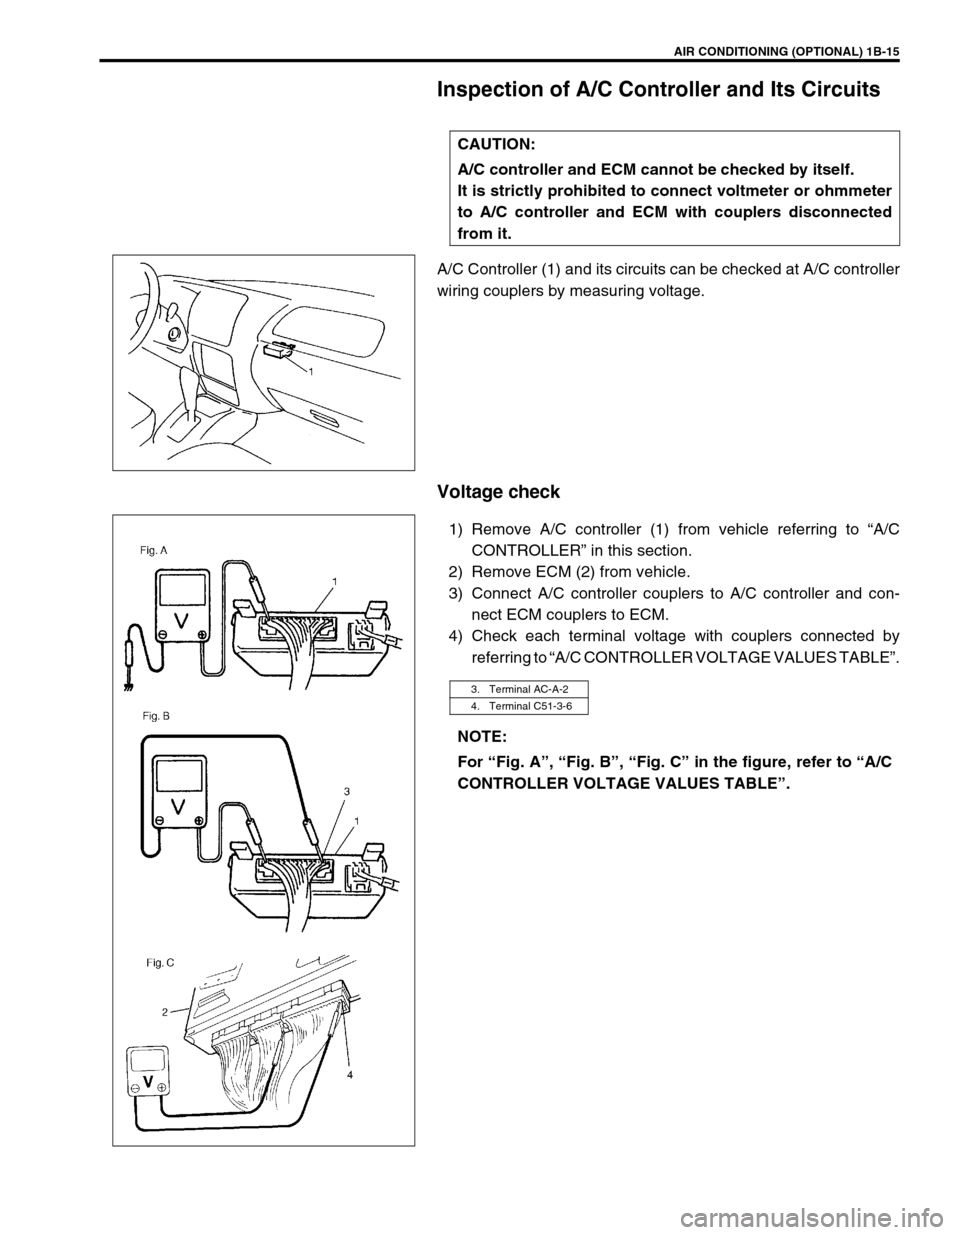 SUZUKI GRAND VITARA 2001 2.G Owners Manual AIR CONDITIONING (OPTIONAL) 1B-15
Inspection of A/C Controller and Its Circuits
A/C Controller (1) and its circuits can be checked at A/C controller
wiring couplers by measuring voltage.
Voltage check